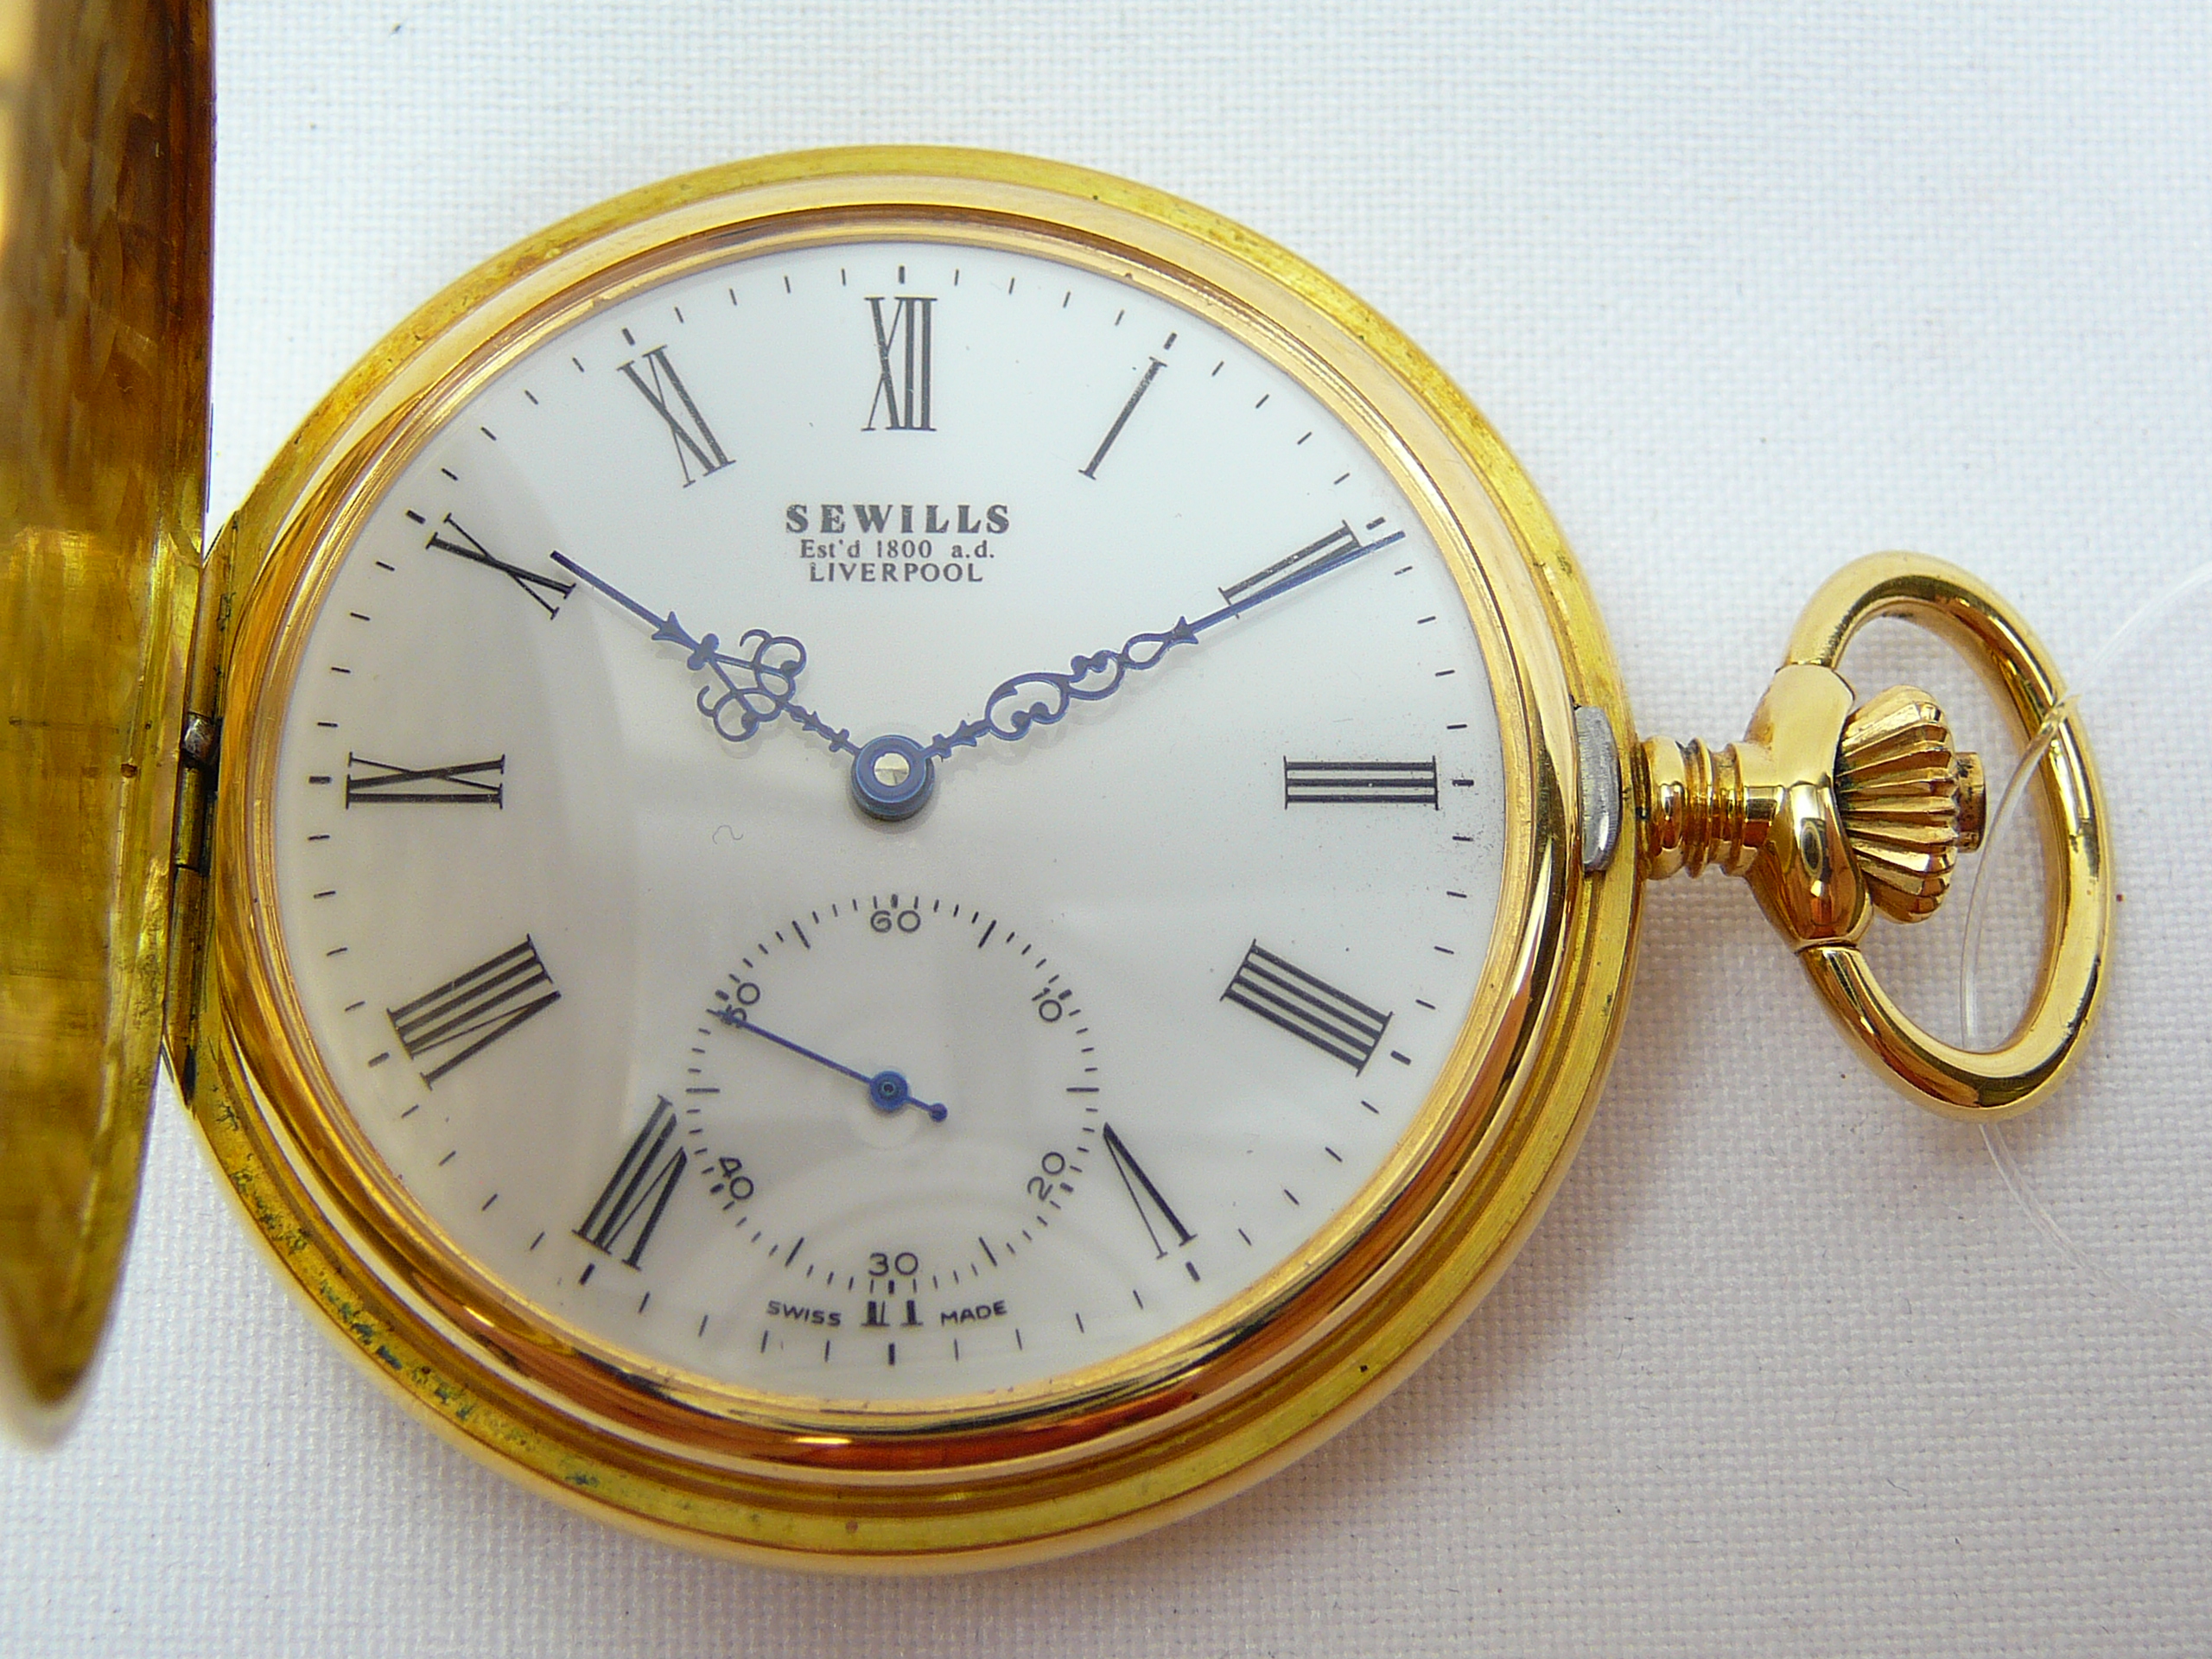 Gents Gold Sewills Gold Hunter Pocket Watch - Image 2 of 6